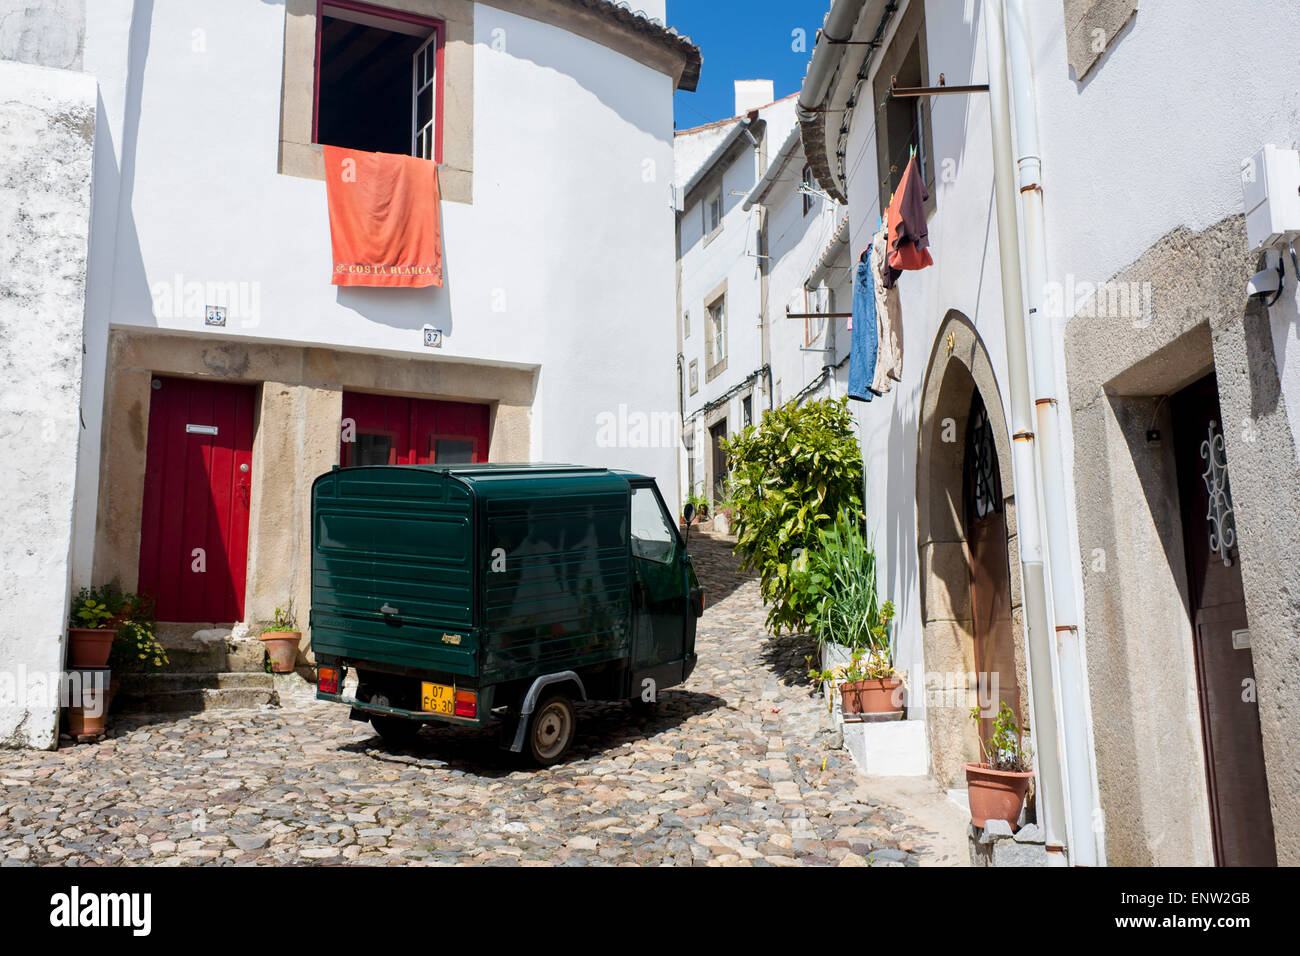 Castelo de Vide Alentejo Portugal Fiat Apecar small van parked in narrow steep cobbled street with typical white houses Stock Photo